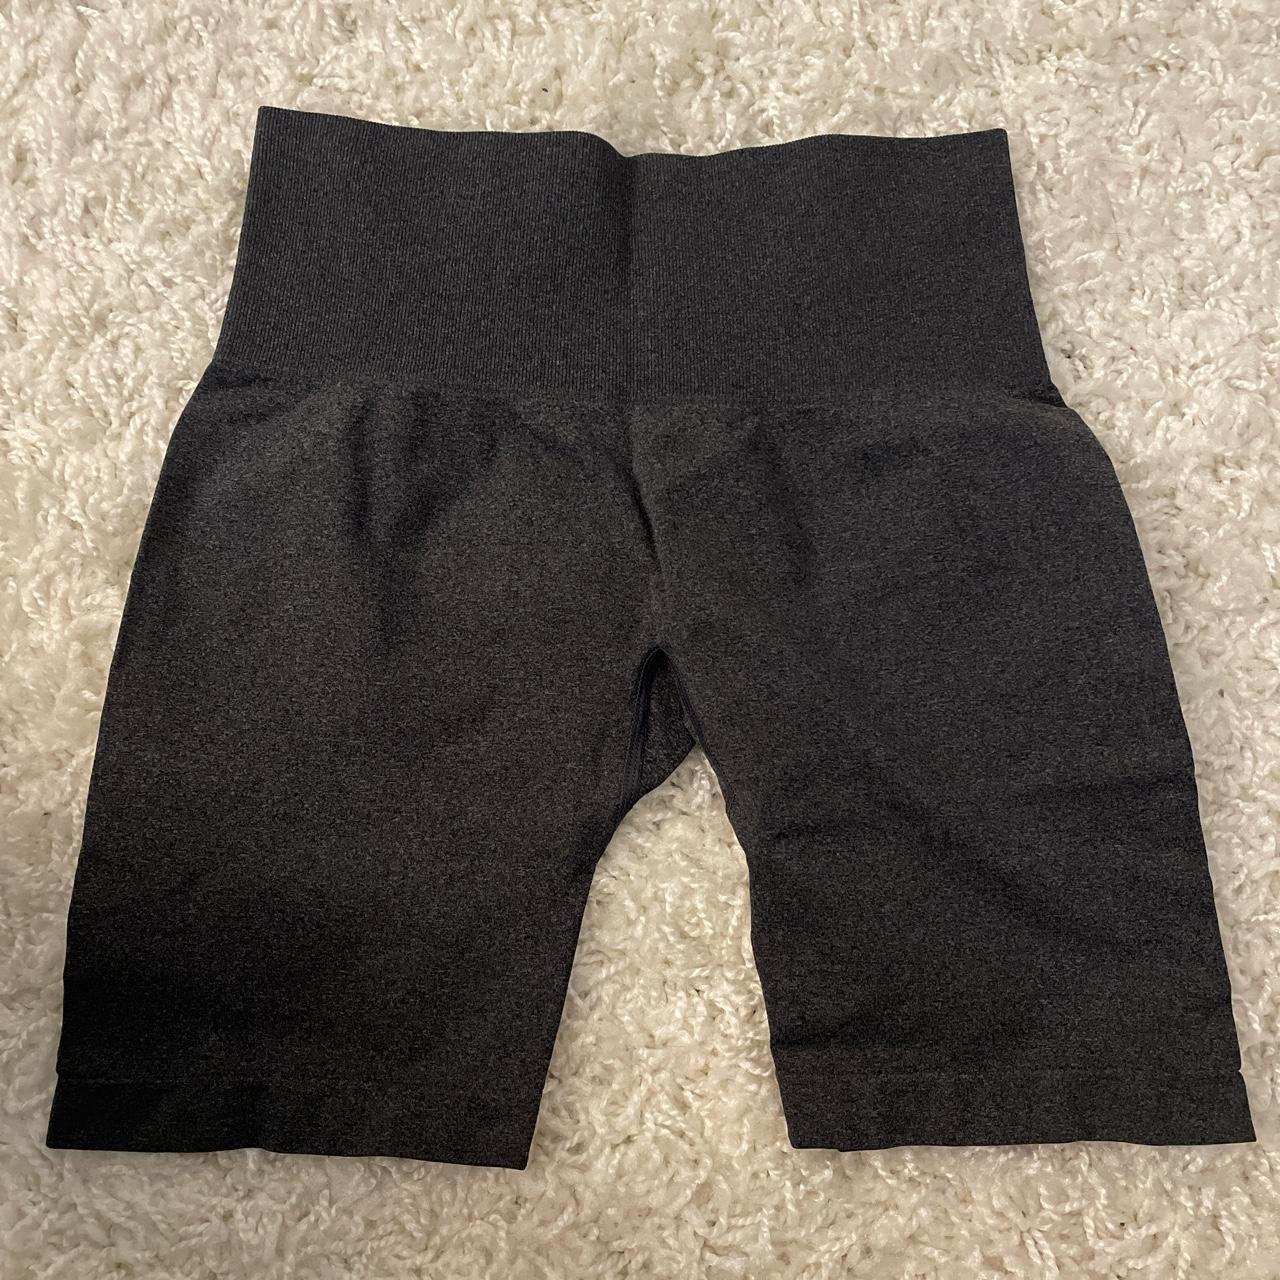 NIKKIFONT ACTIVEWEAR GYM SHORTS These are super... - Depop